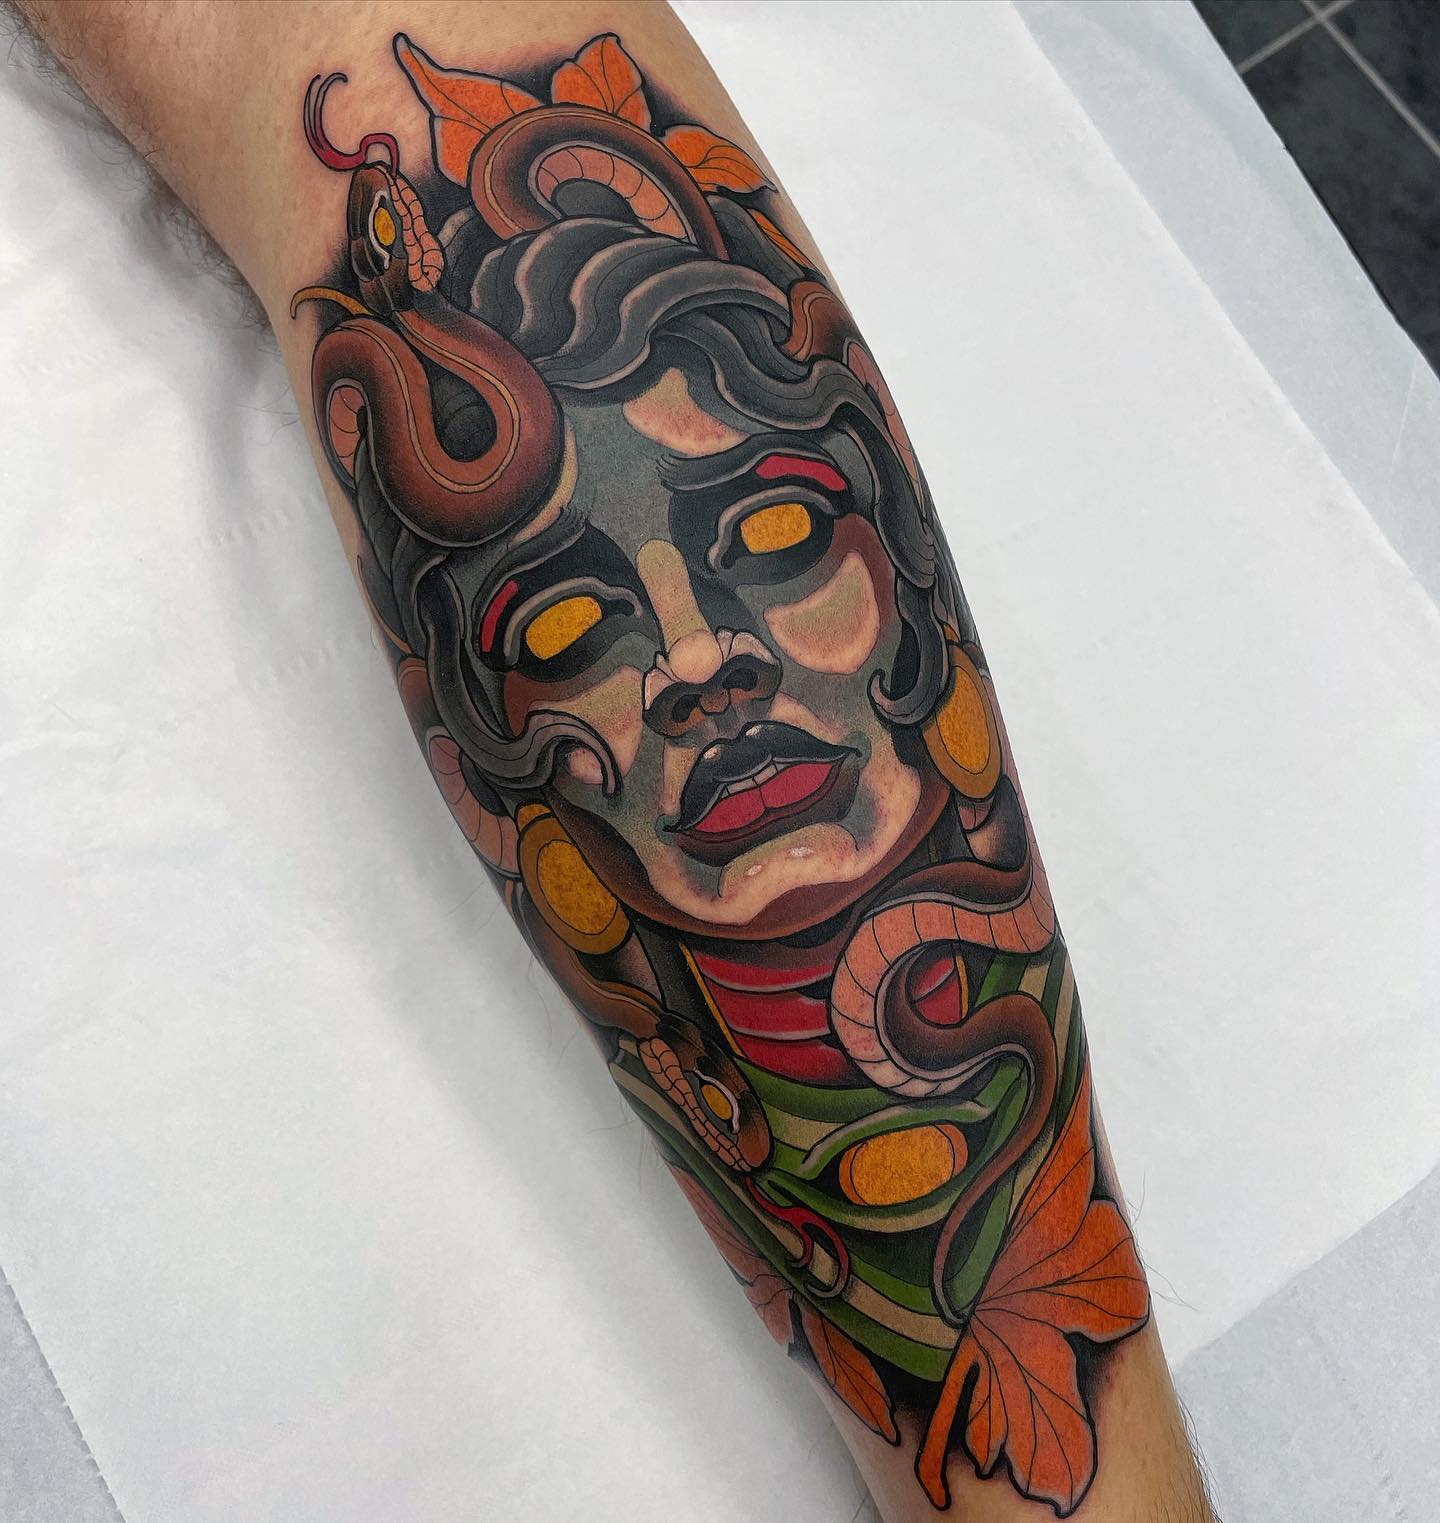 Being one of the traditional tattoos of Medusa, the one above is totally a different version of savage Medusa. The color palette and the saturation are quite amazing. Give a shot to this abstract-looking Medusa.